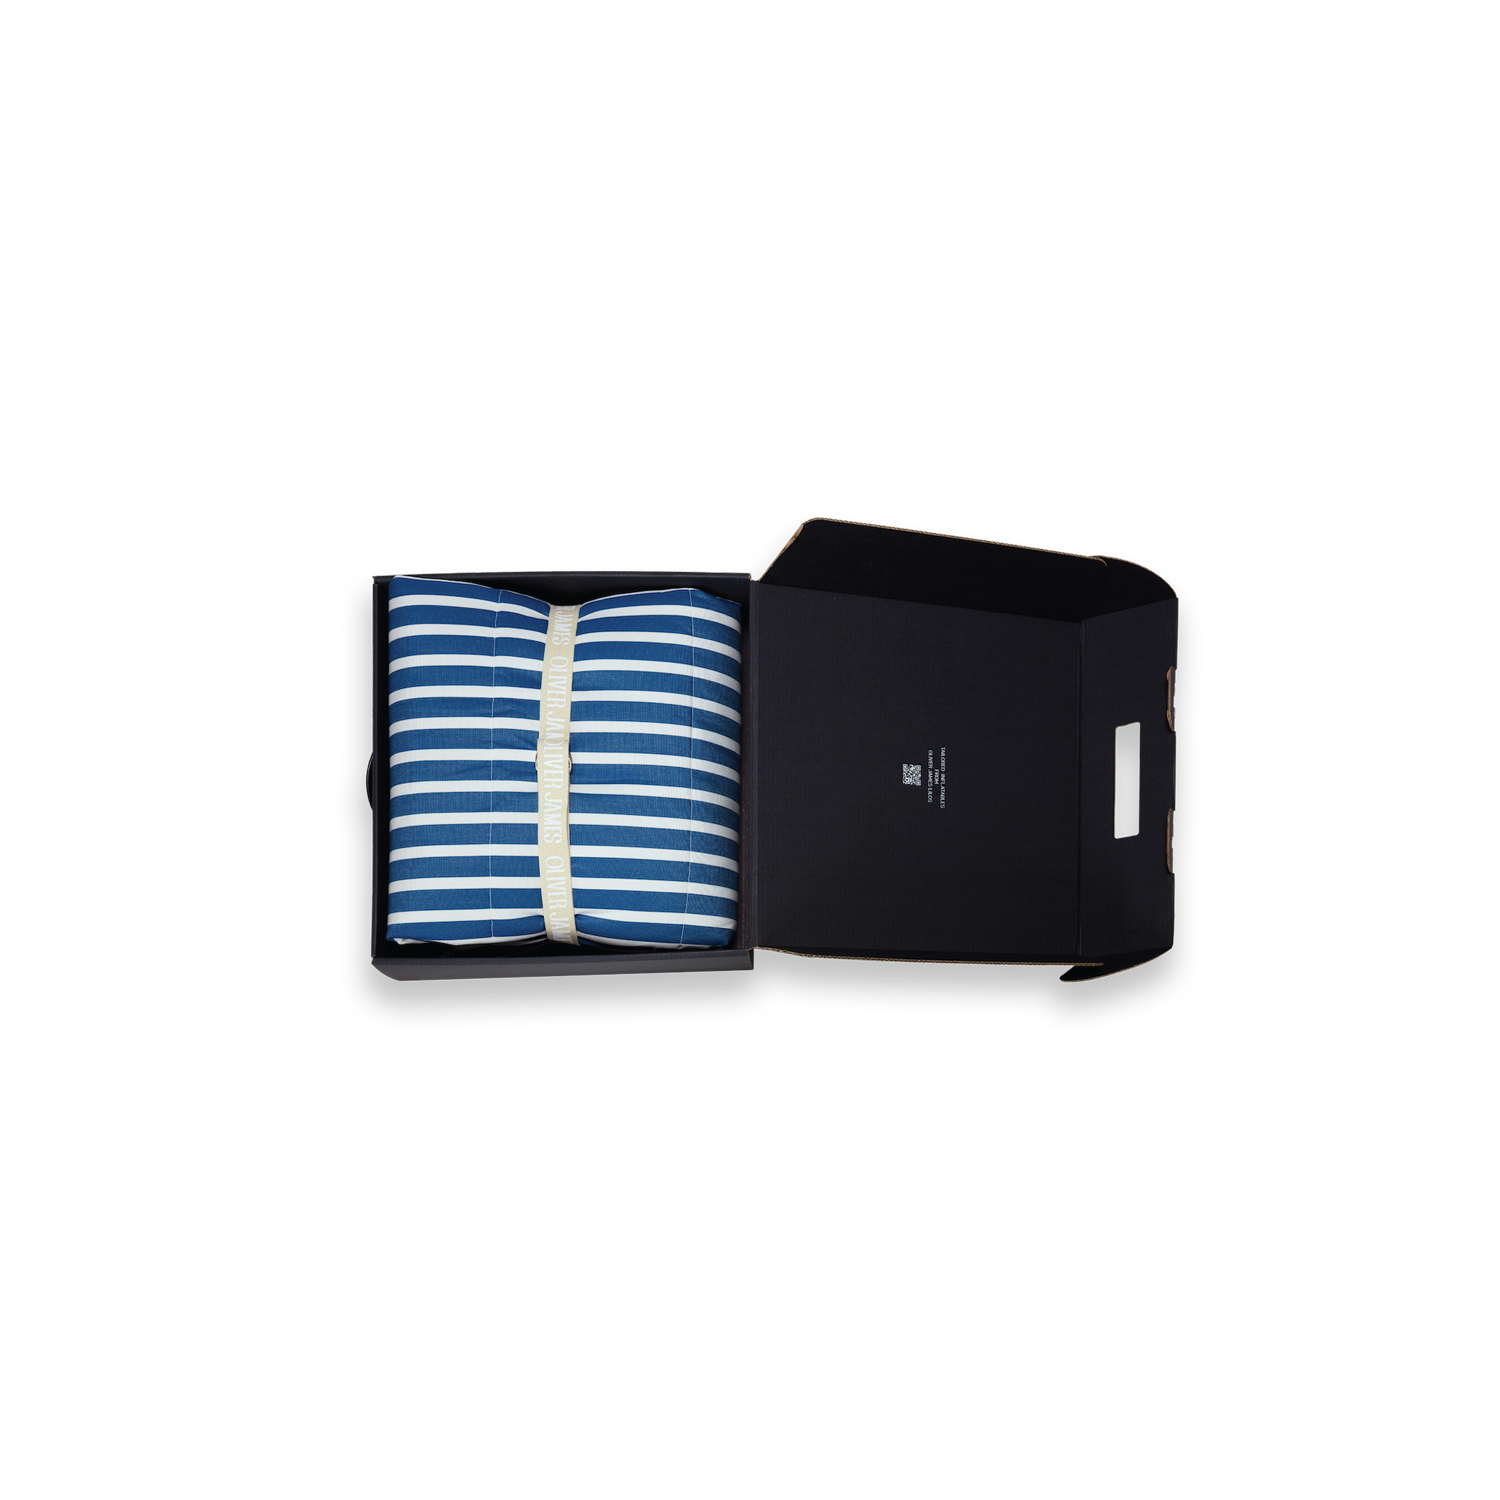 A double white and blue stripe inflatable luxury pool float lounger cover folded in black box box with a belt, card and pump.